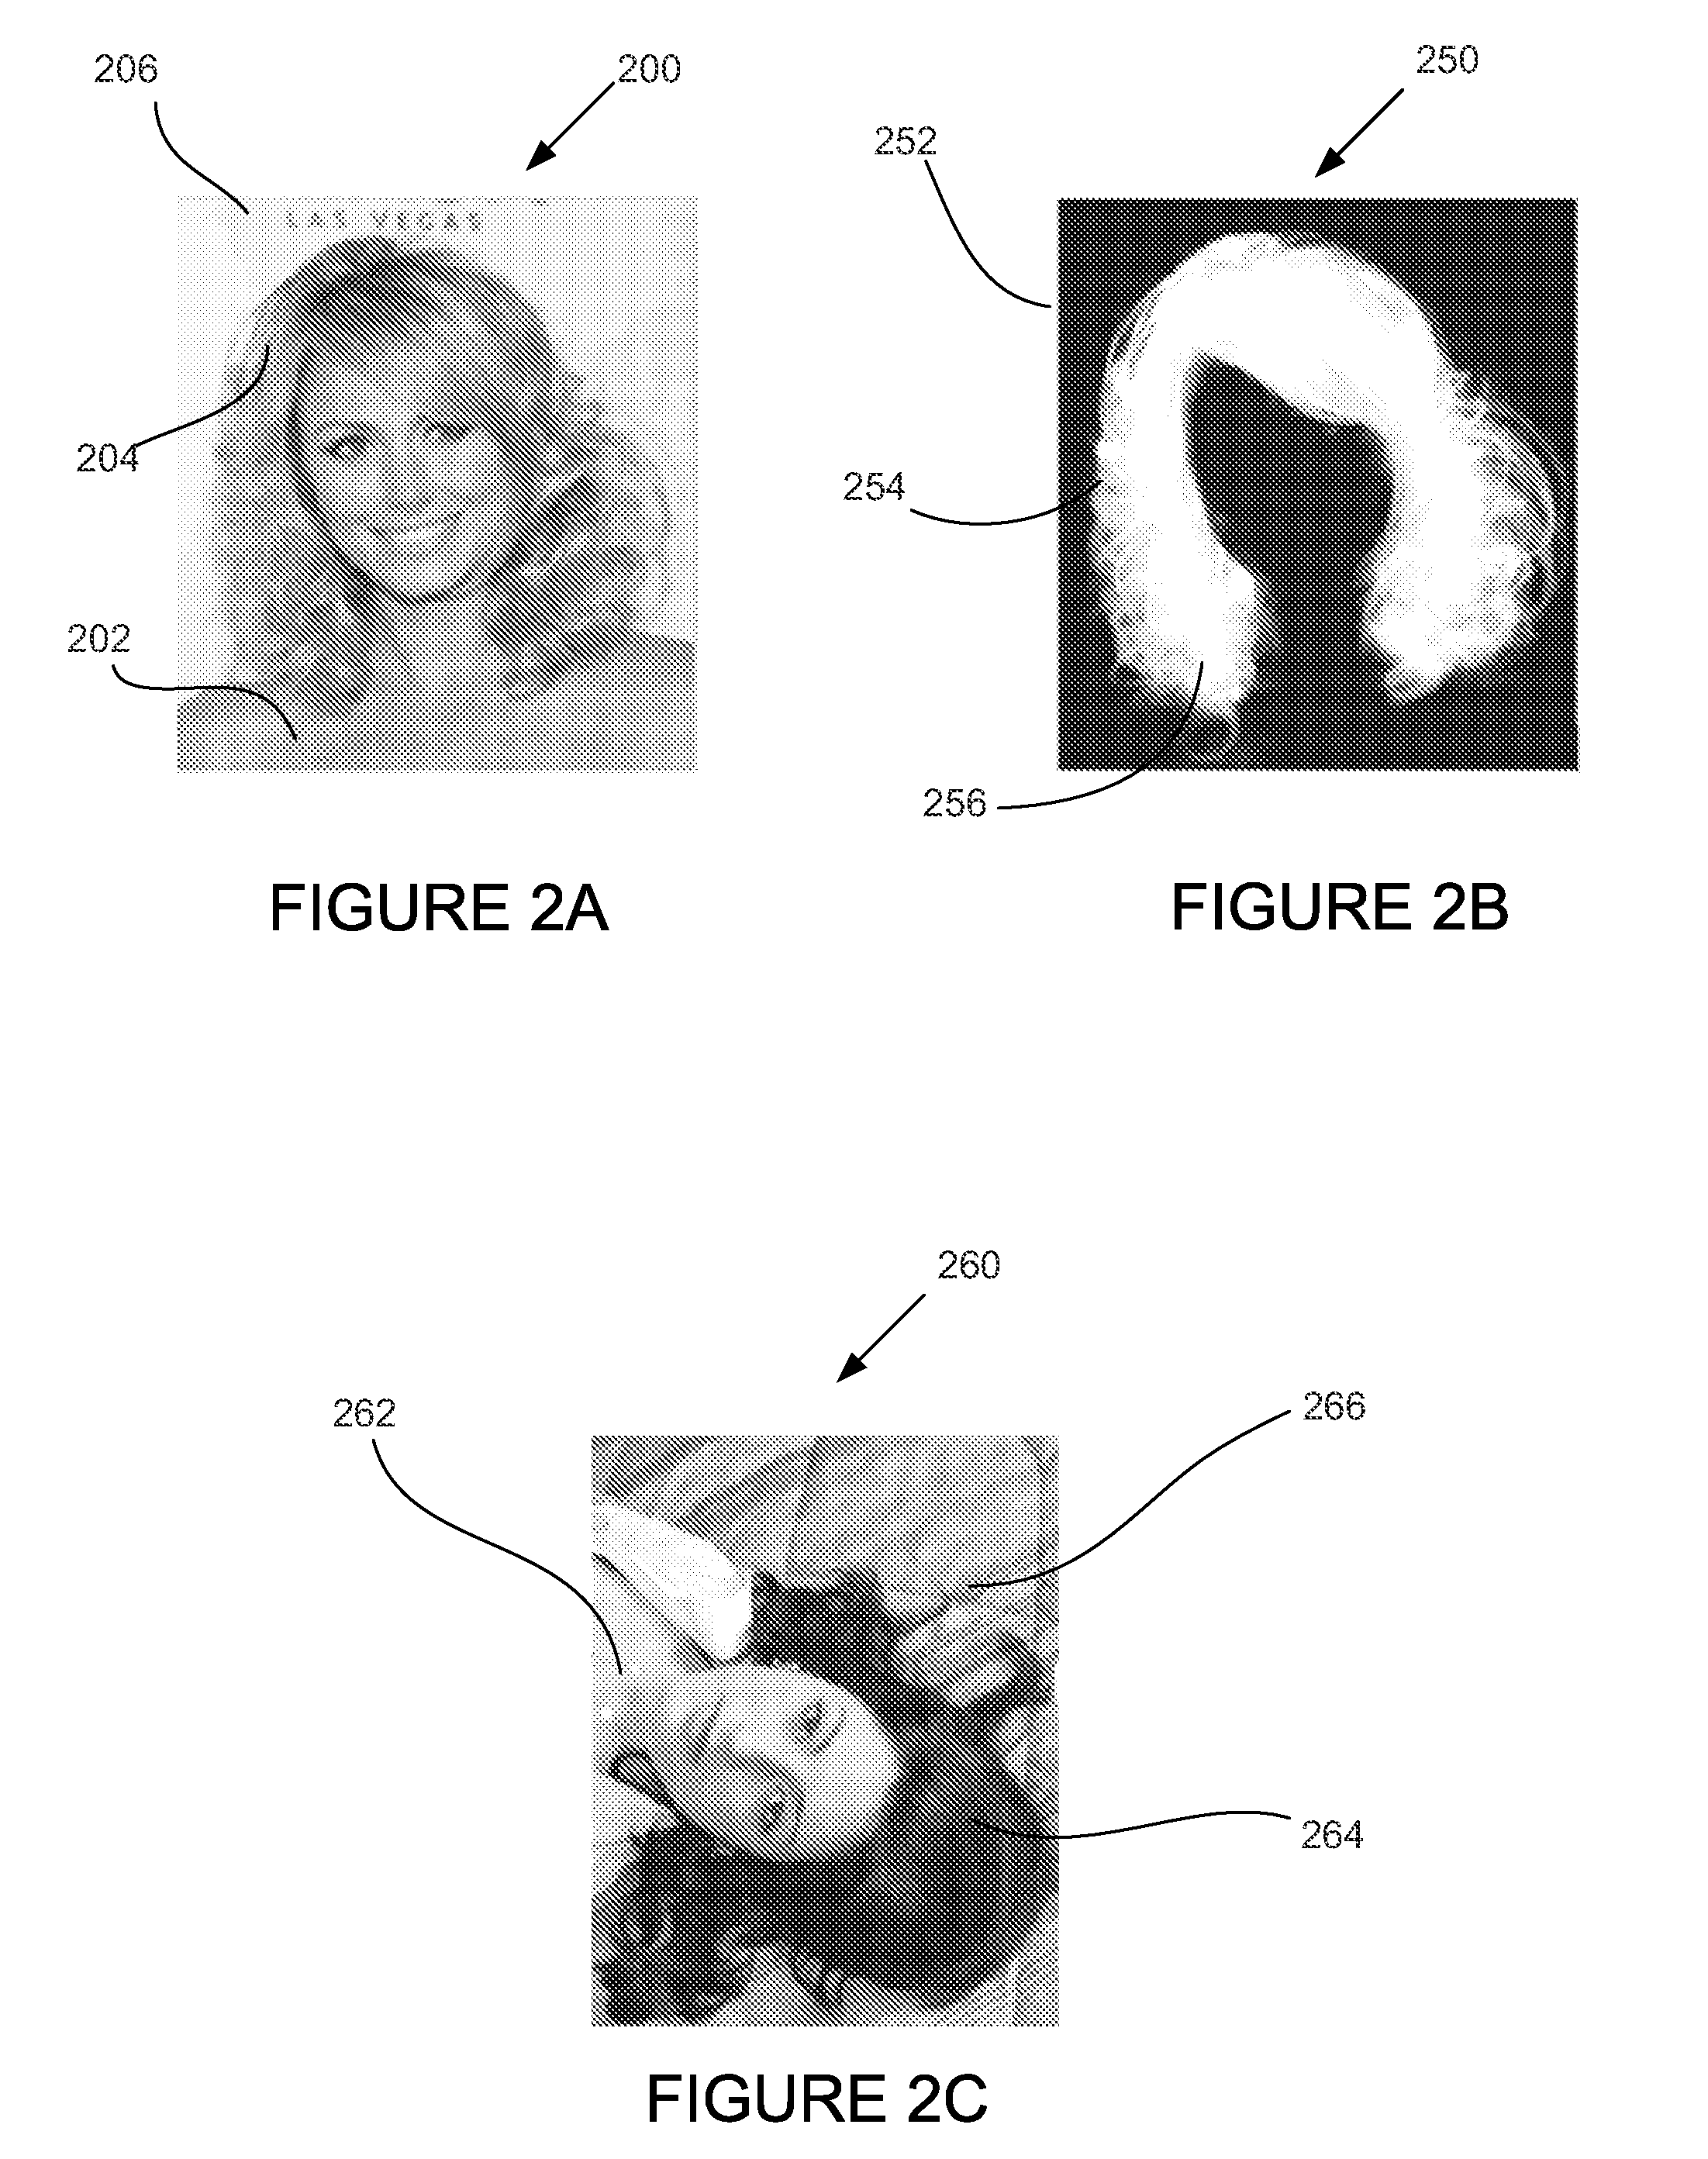 System and method for changing hair color in digital images